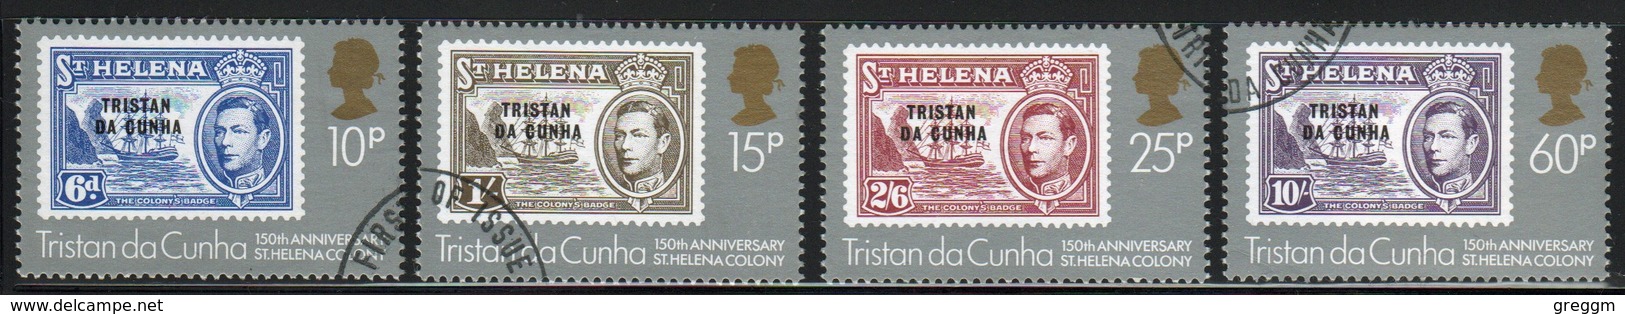 Tristan Da Cunha 1983 Complete Set Of Stamps Commemorating 150th Anniversary Of St Helena As British Colony. - Tristan Da Cunha